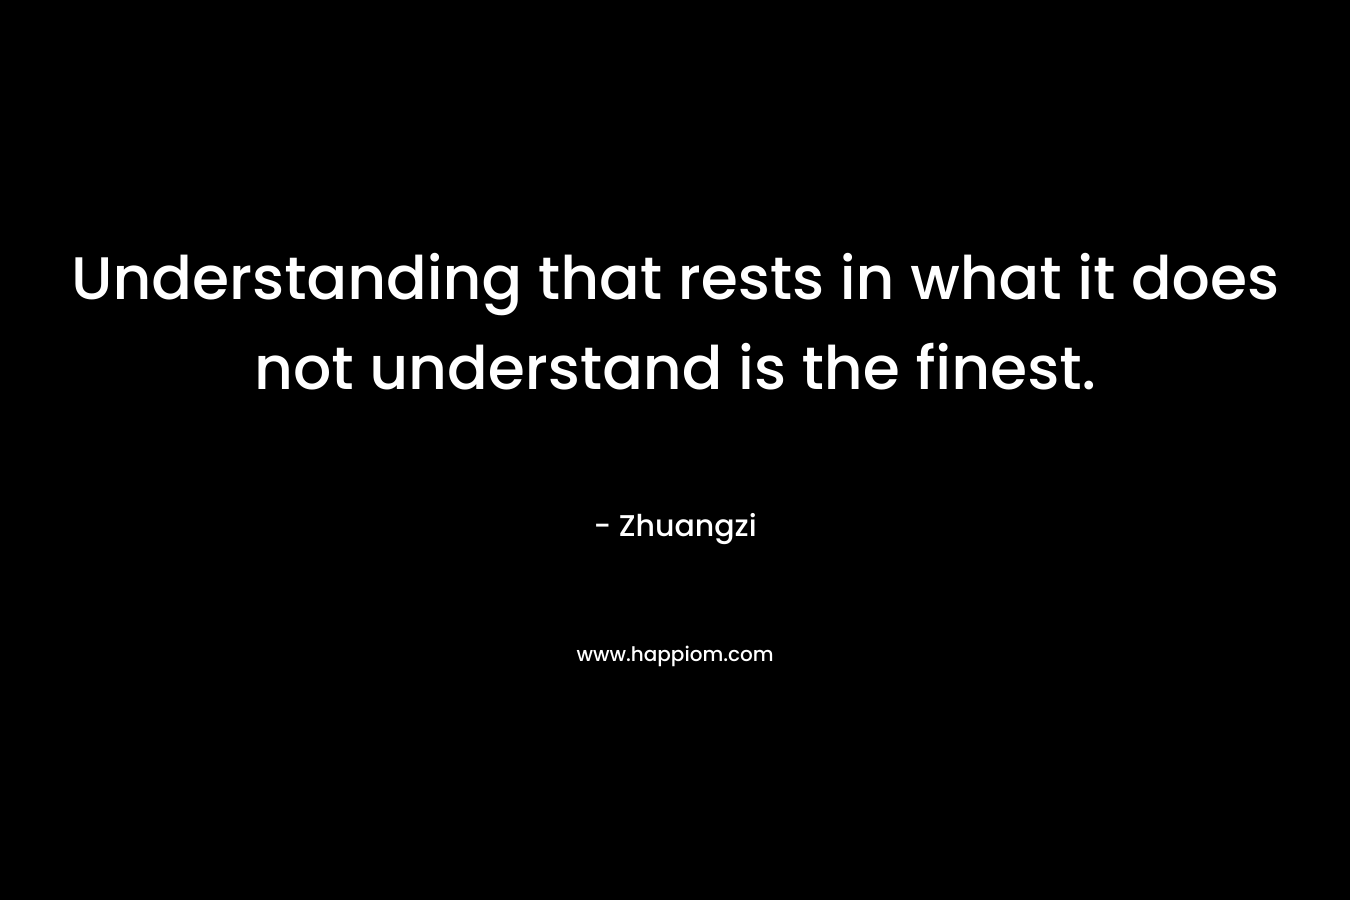 Understanding that rests in what it does not understand is the finest. – Zhuangzi